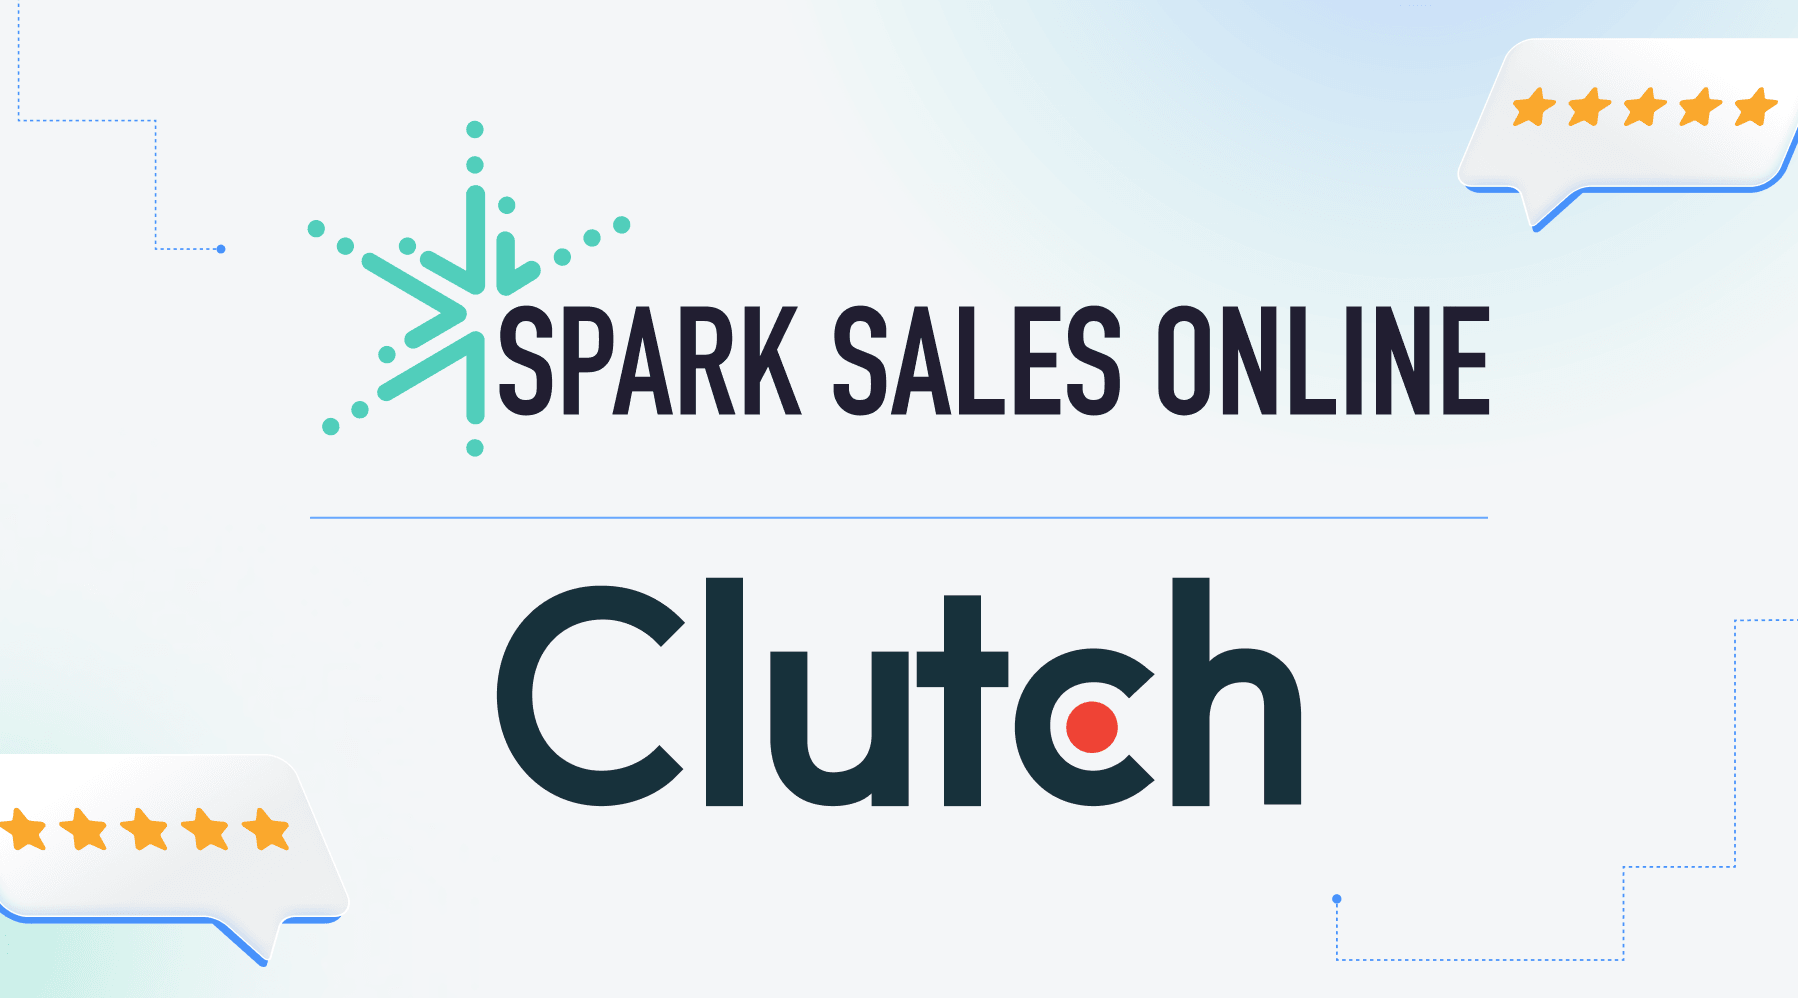 Clutch Recognizes Spark Sales Online as one of the Game Changers in UK’s IT Space